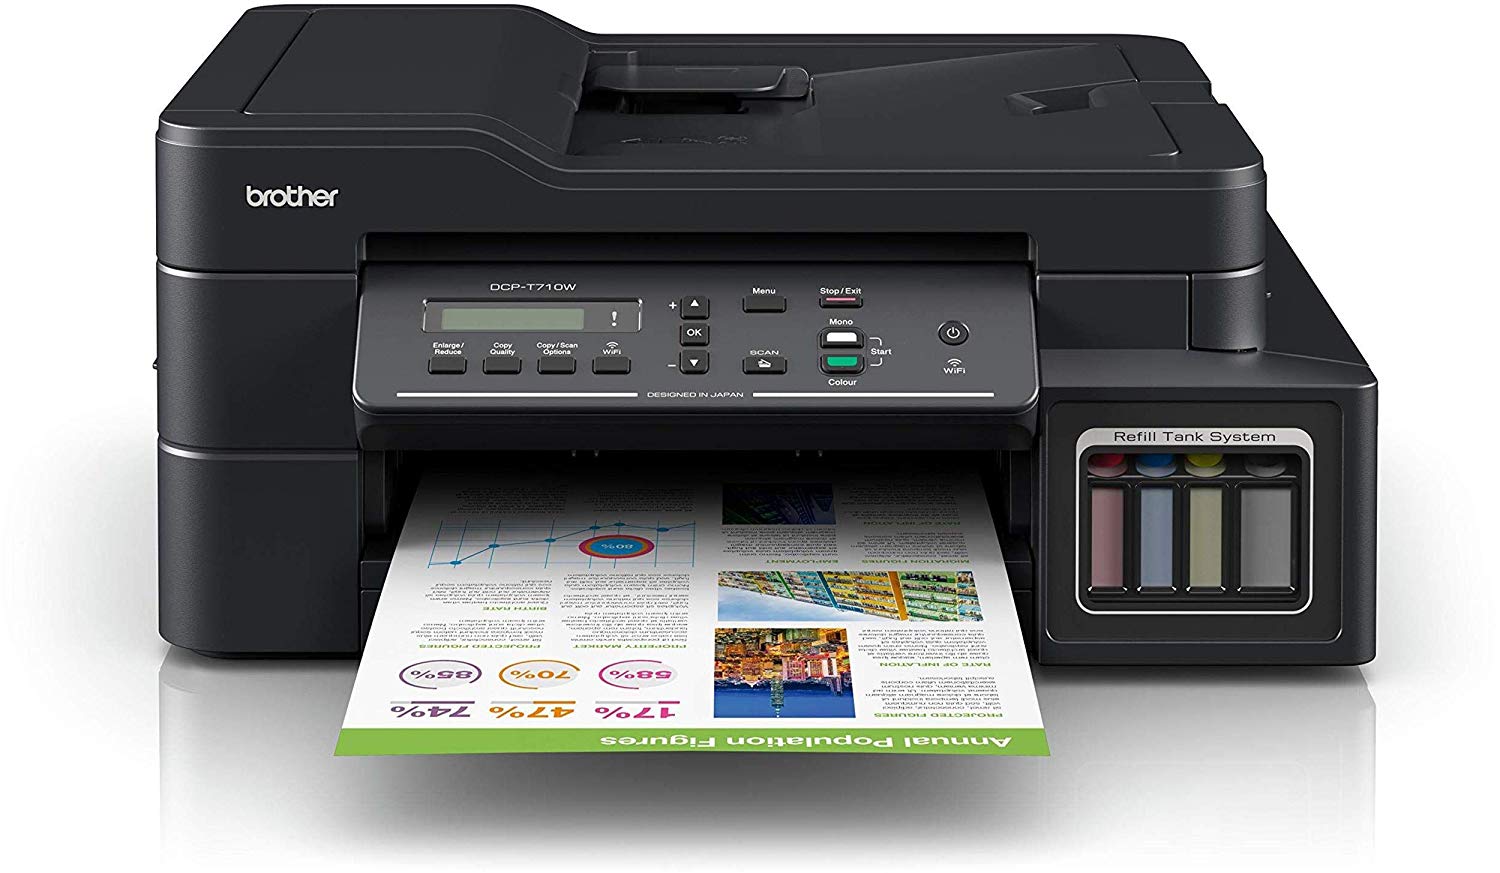 Brother Ink Tank Multi-Function Printer DCP-T710W Print, Copy, Scan ,Wi-fi Direct & 20 Sheets ADF with Display